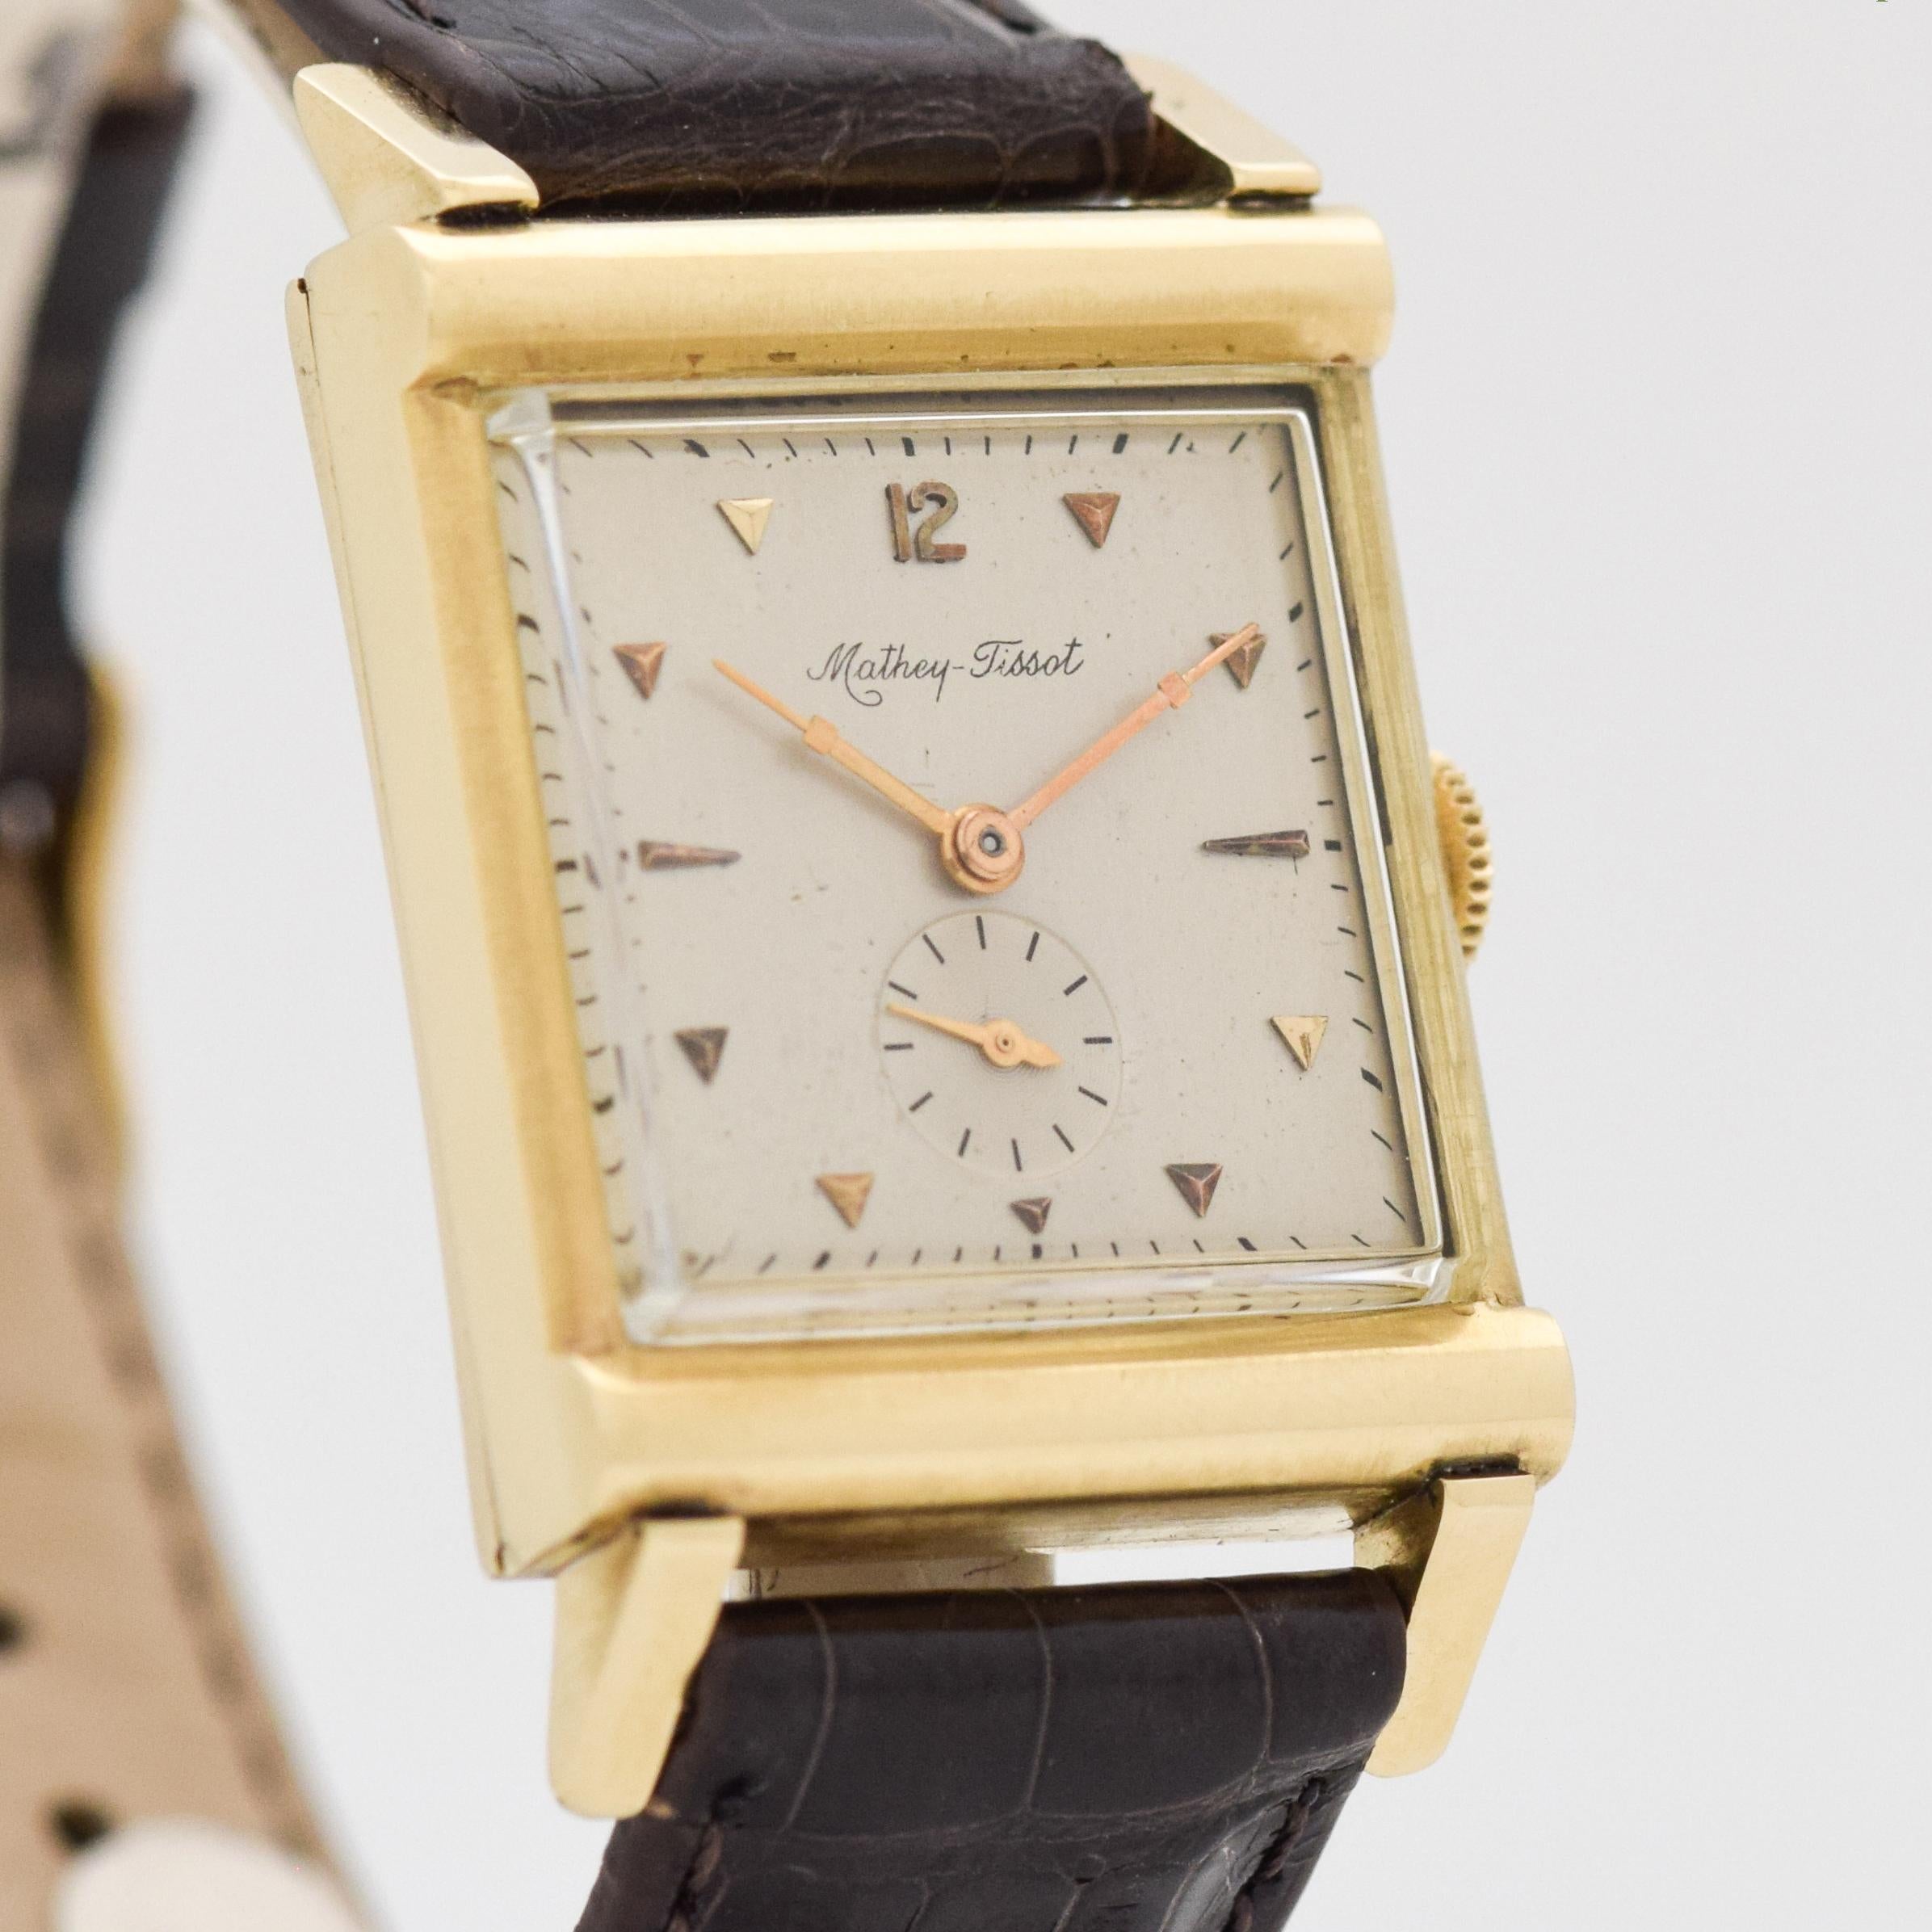 1940'S Vintage Mathey Tissot 14k Yellow Gold watch with Original Silver Dial with Applied Gold Arabic 12 with Beveled Triangle and Elongated Triangle Markers. 25mm x 40mm lug to lug (0.98 in. x 1.57 in.) - 17 jewel, manual caliber movement. Triple